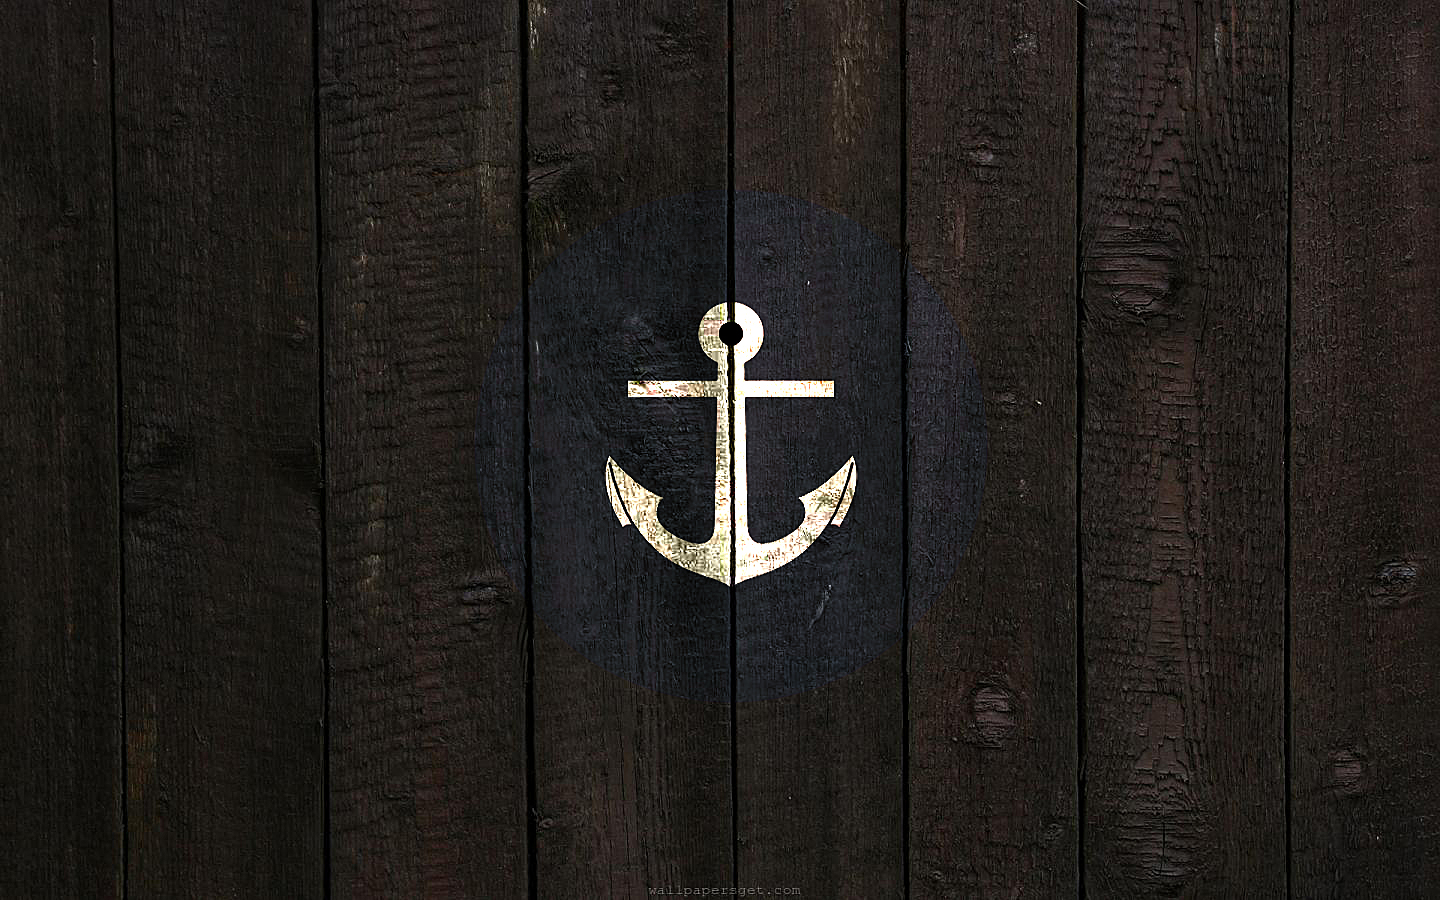 Nautical Themed Background So I Remade The Wallpaper For